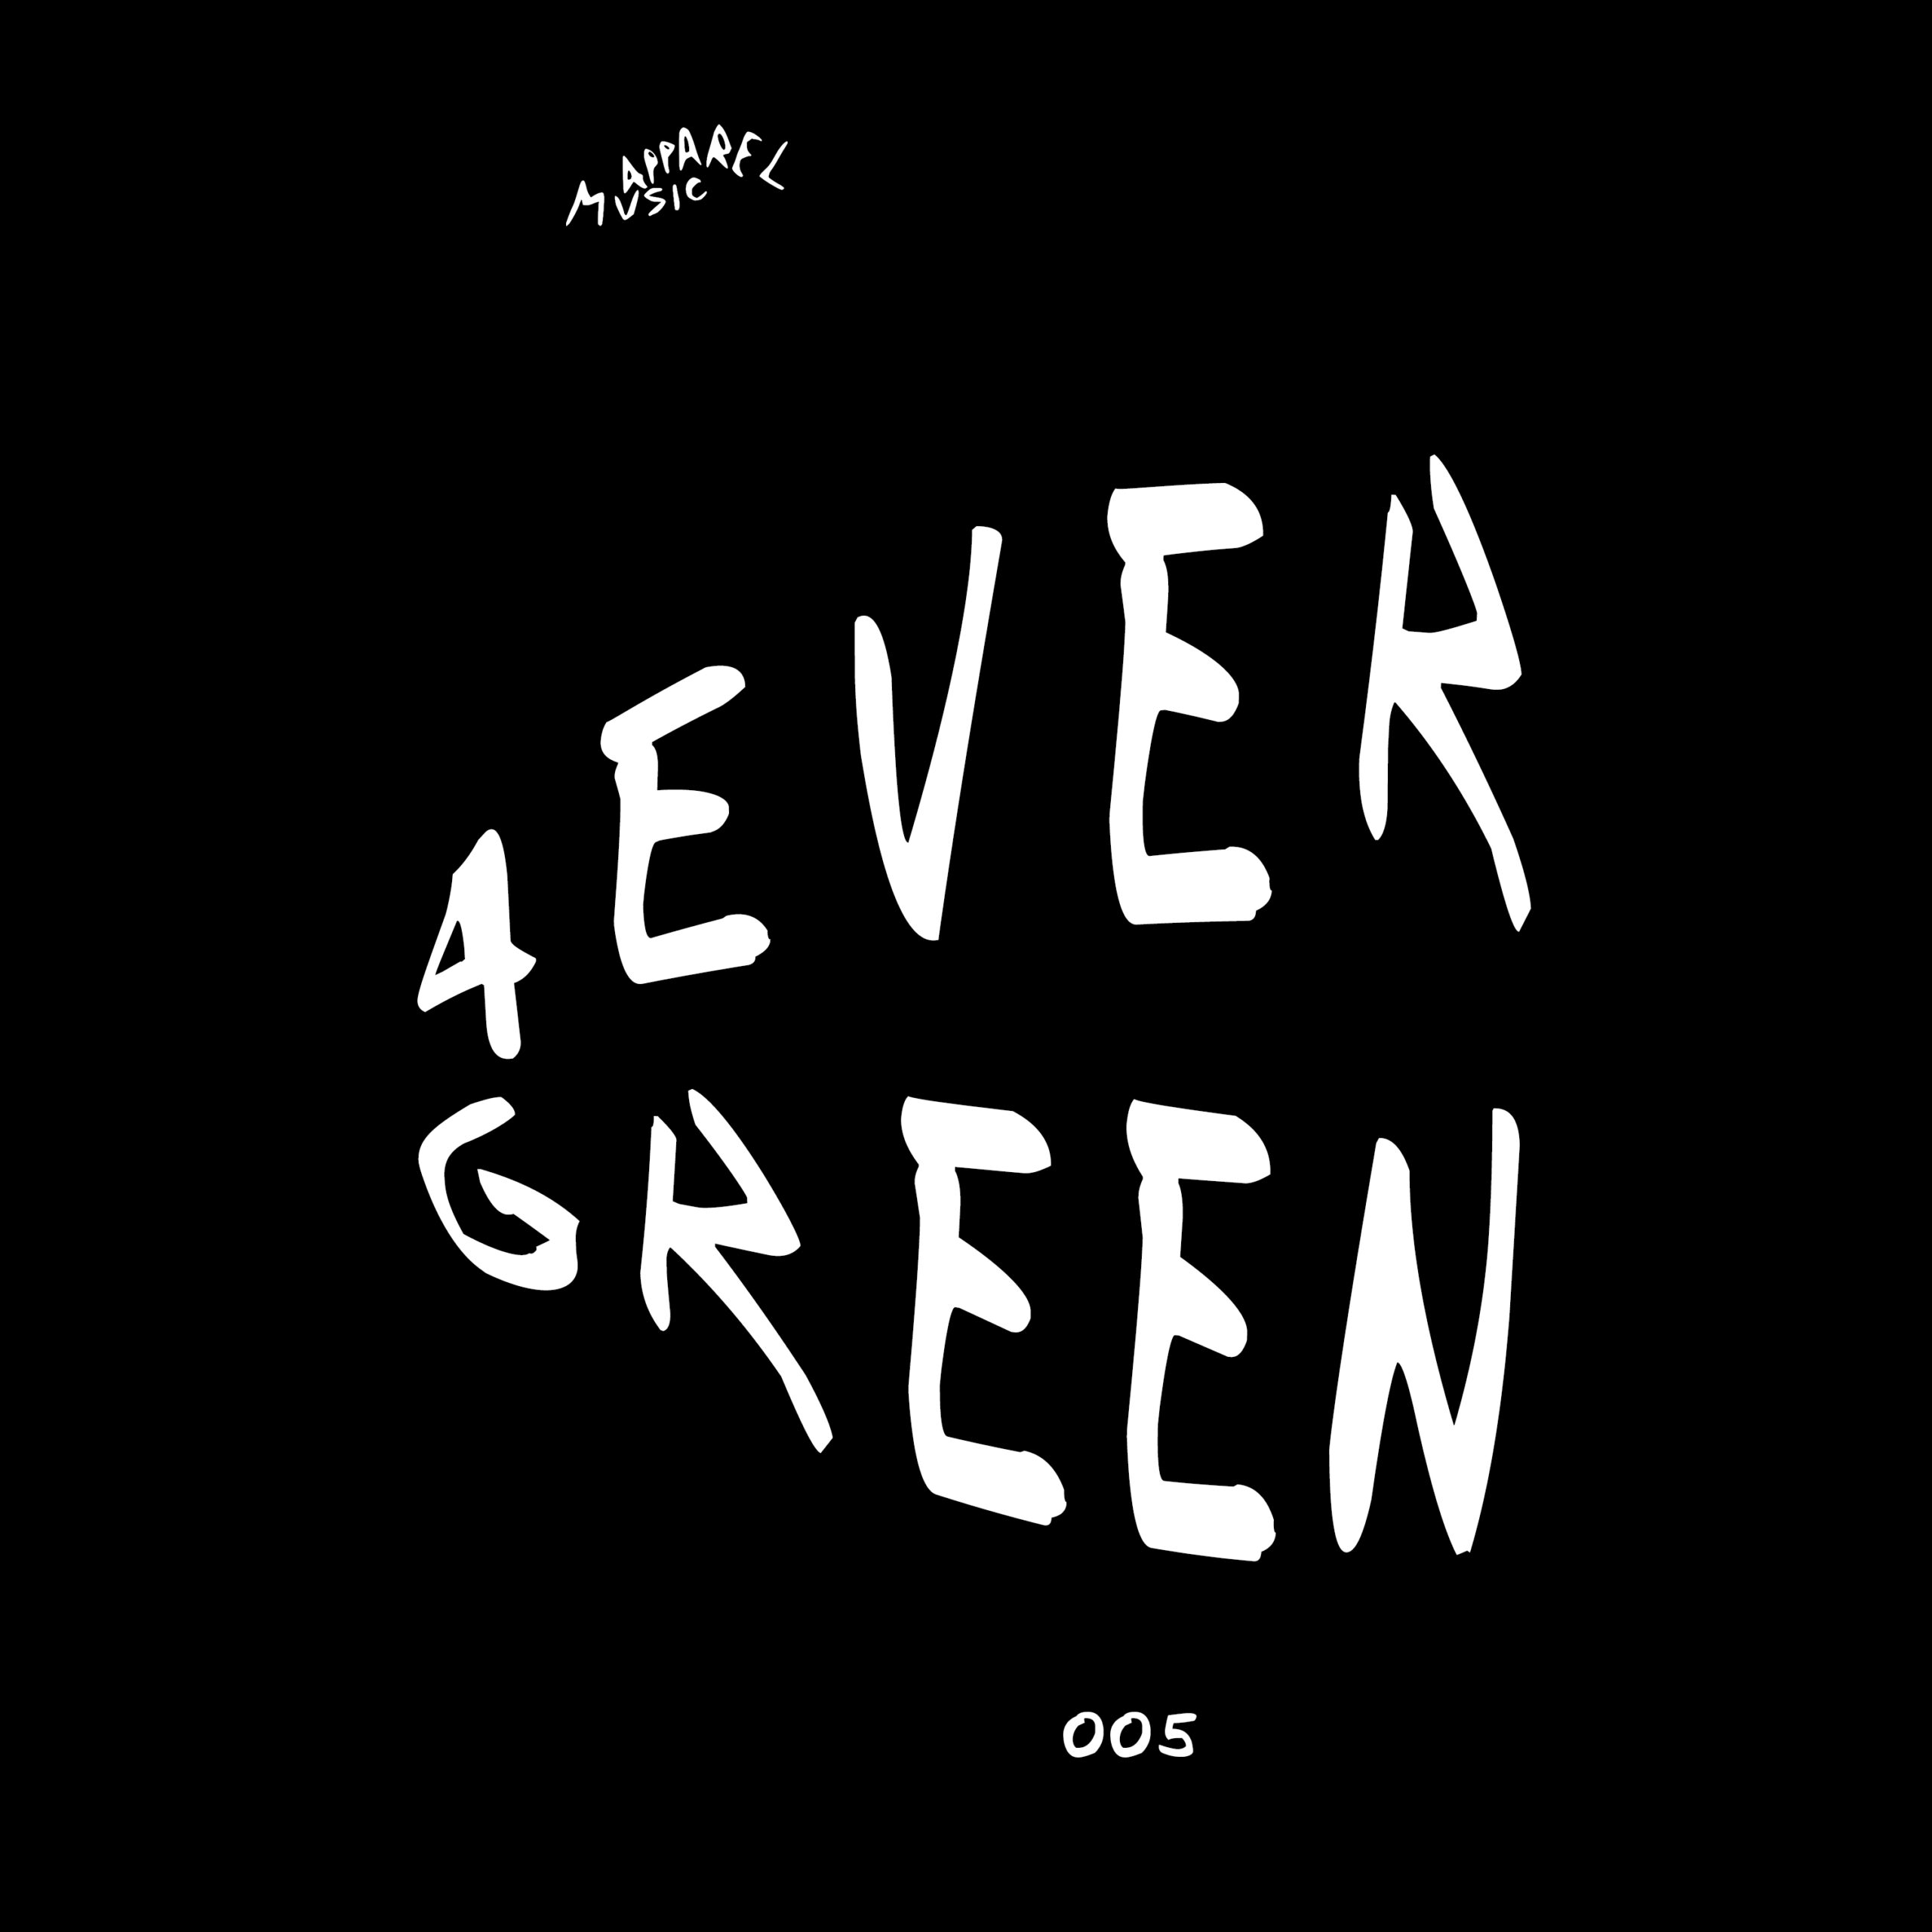 Out now ‘4evergreen 005’ by Various Artists